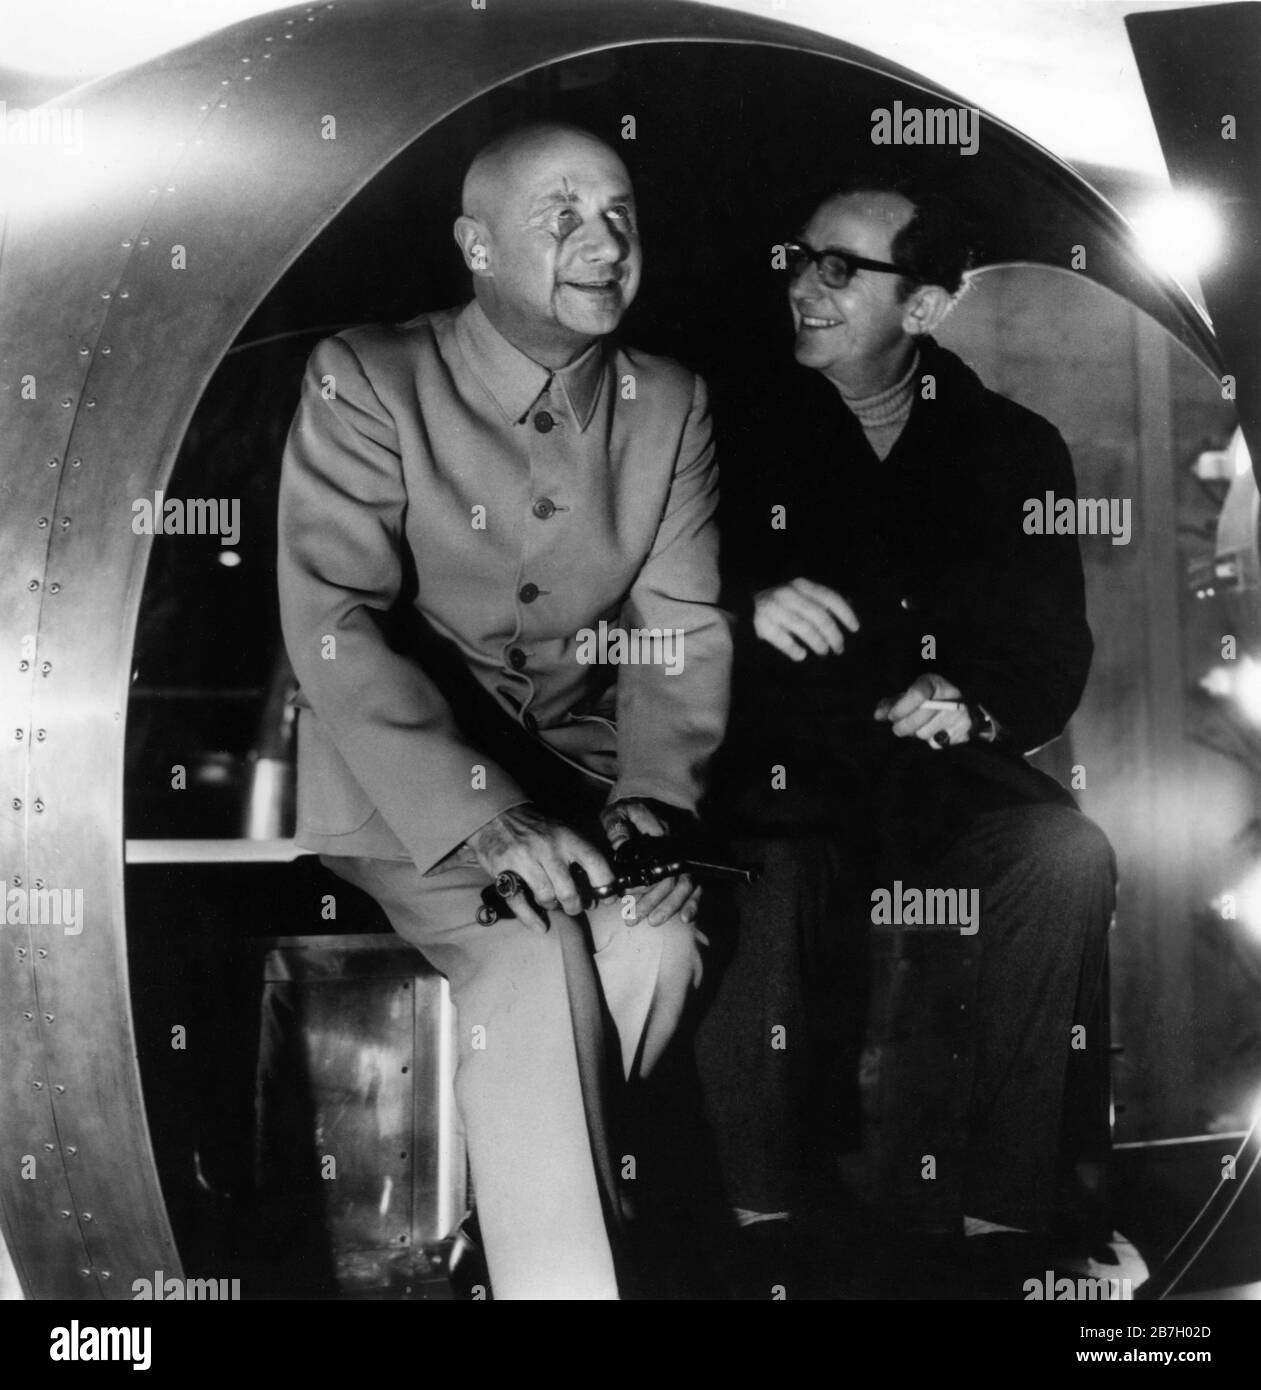 Donald Pleasance In Costume As Ernst Stavro Blofed With Director Lewis Gilbert On Set Candid During Filming On Volcano Set For You Only Live Twice 1967 Director Lewis Gilbert Novel Ian Fleming